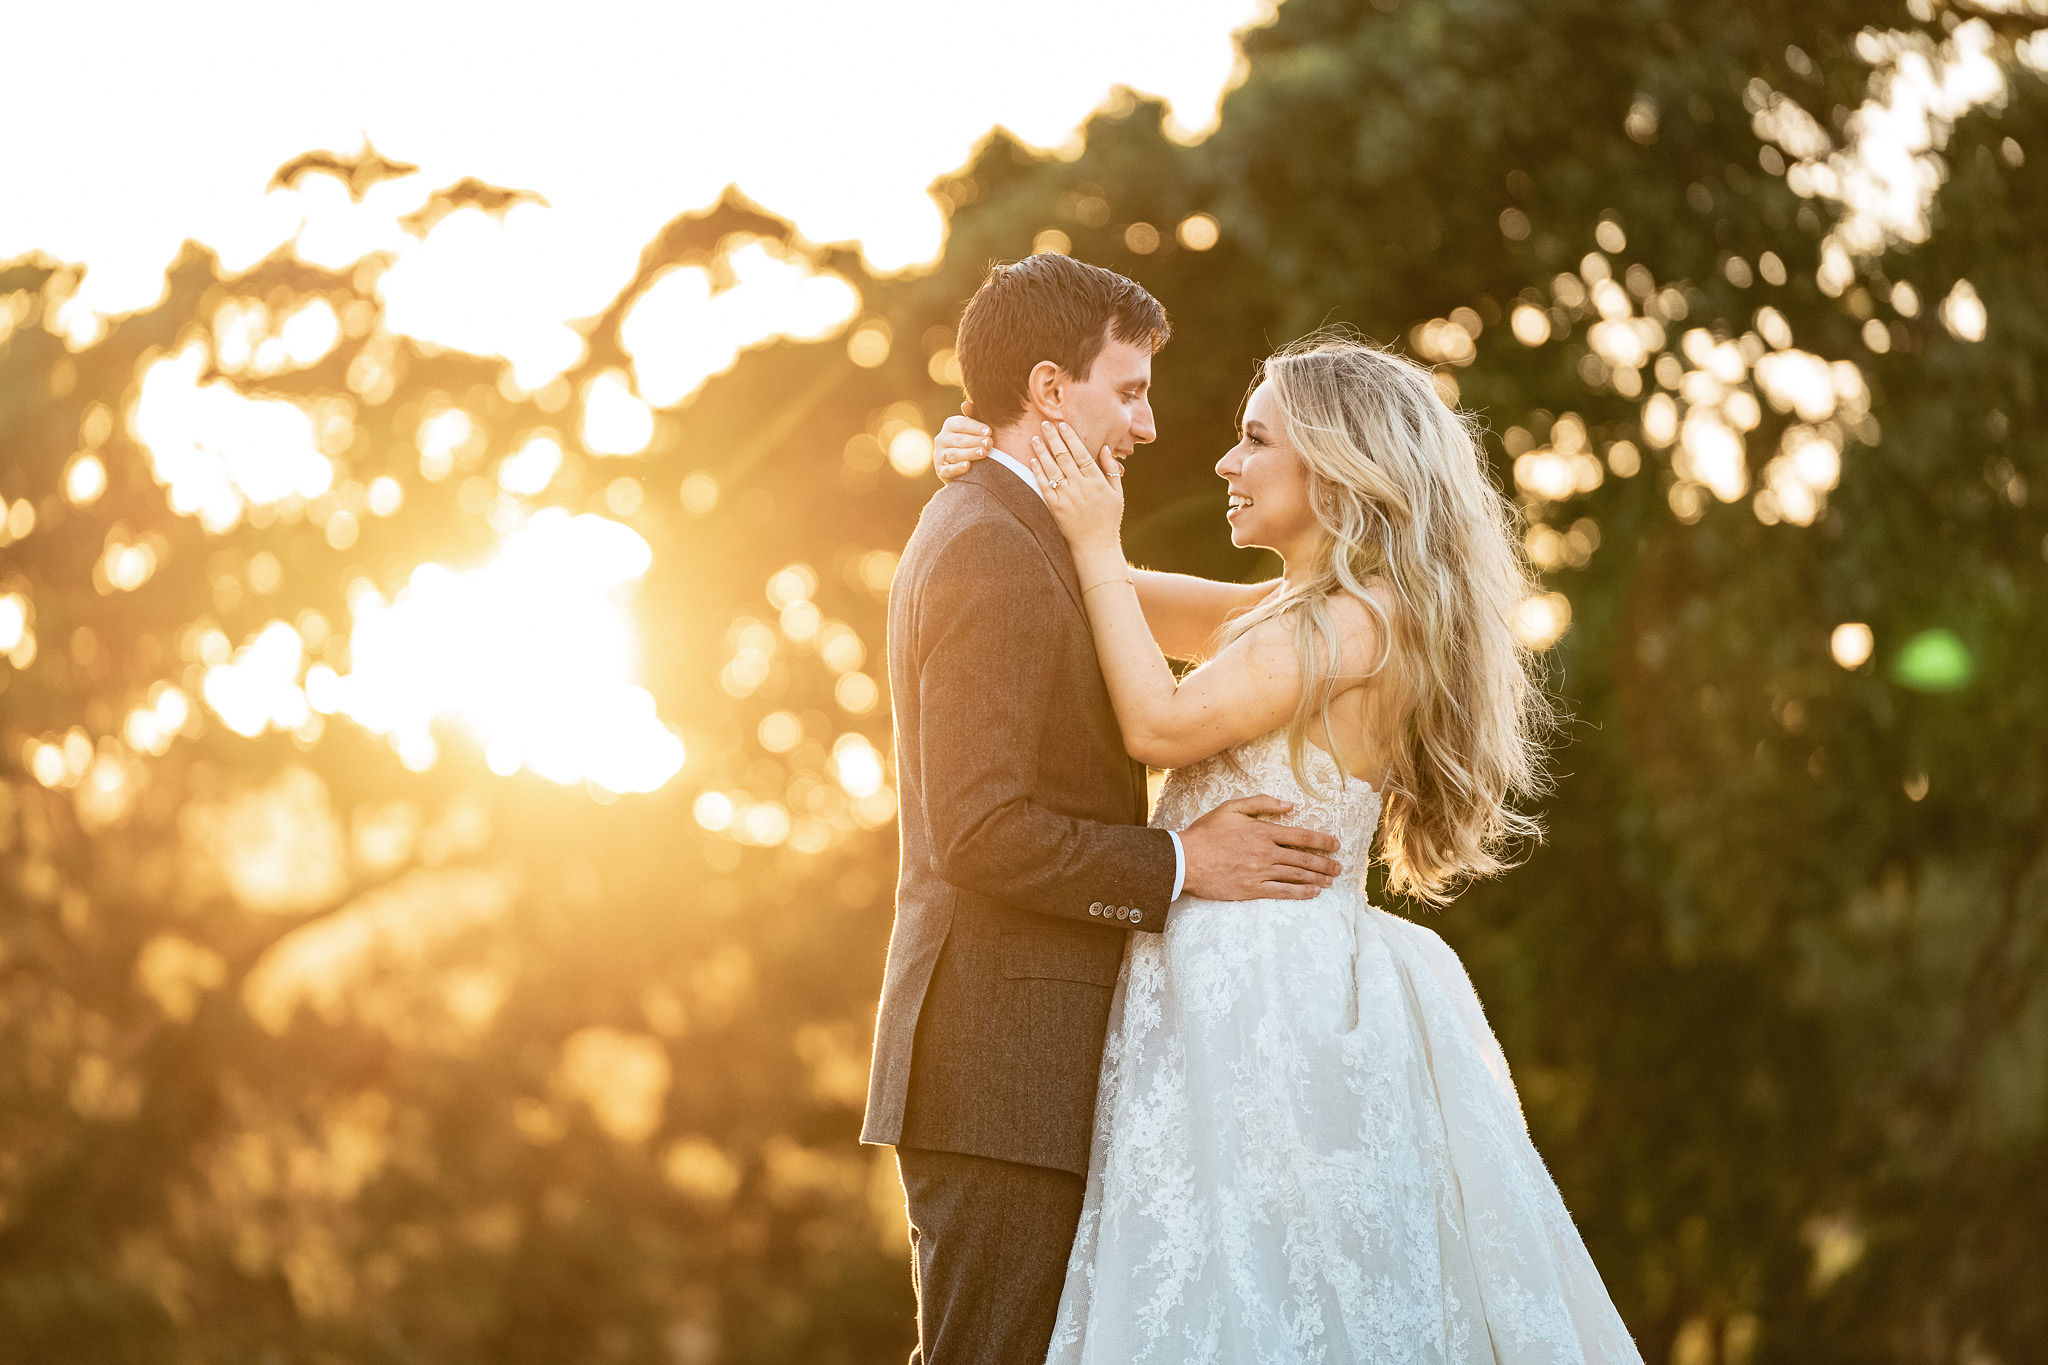 Kathryn & Kevin ~ A Romantic Sonoma Wedding at BR Cohn Winery